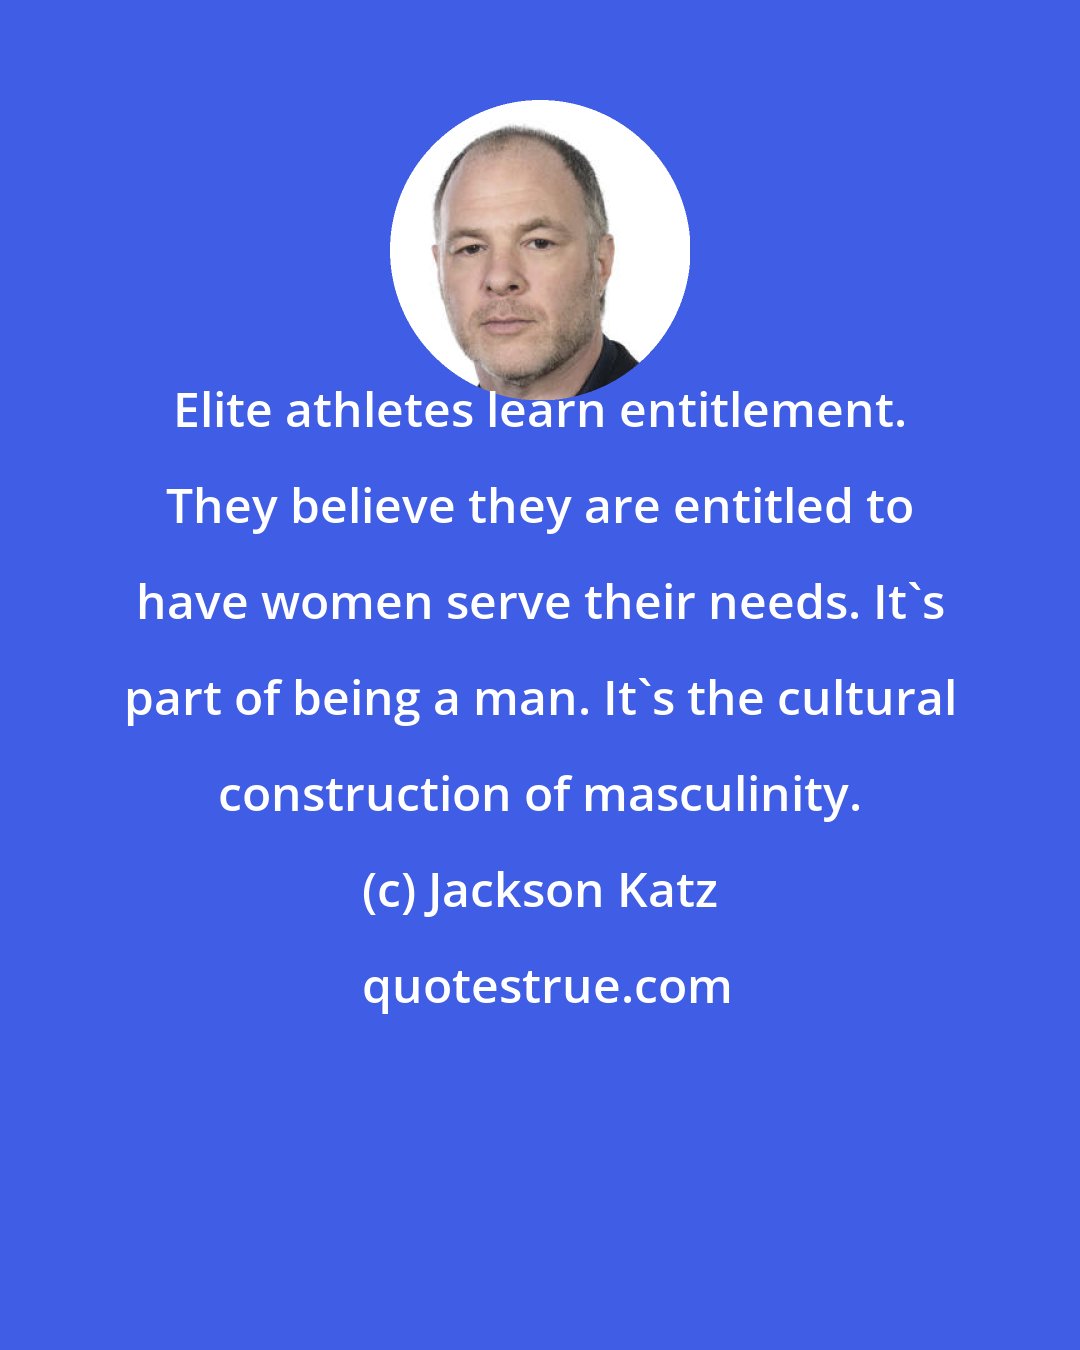 Jackson Katz: Elite athletes learn entitlement. They believe they are entitled to have women serve their needs. It's part of being a man. It's the cultural construction of masculinity.